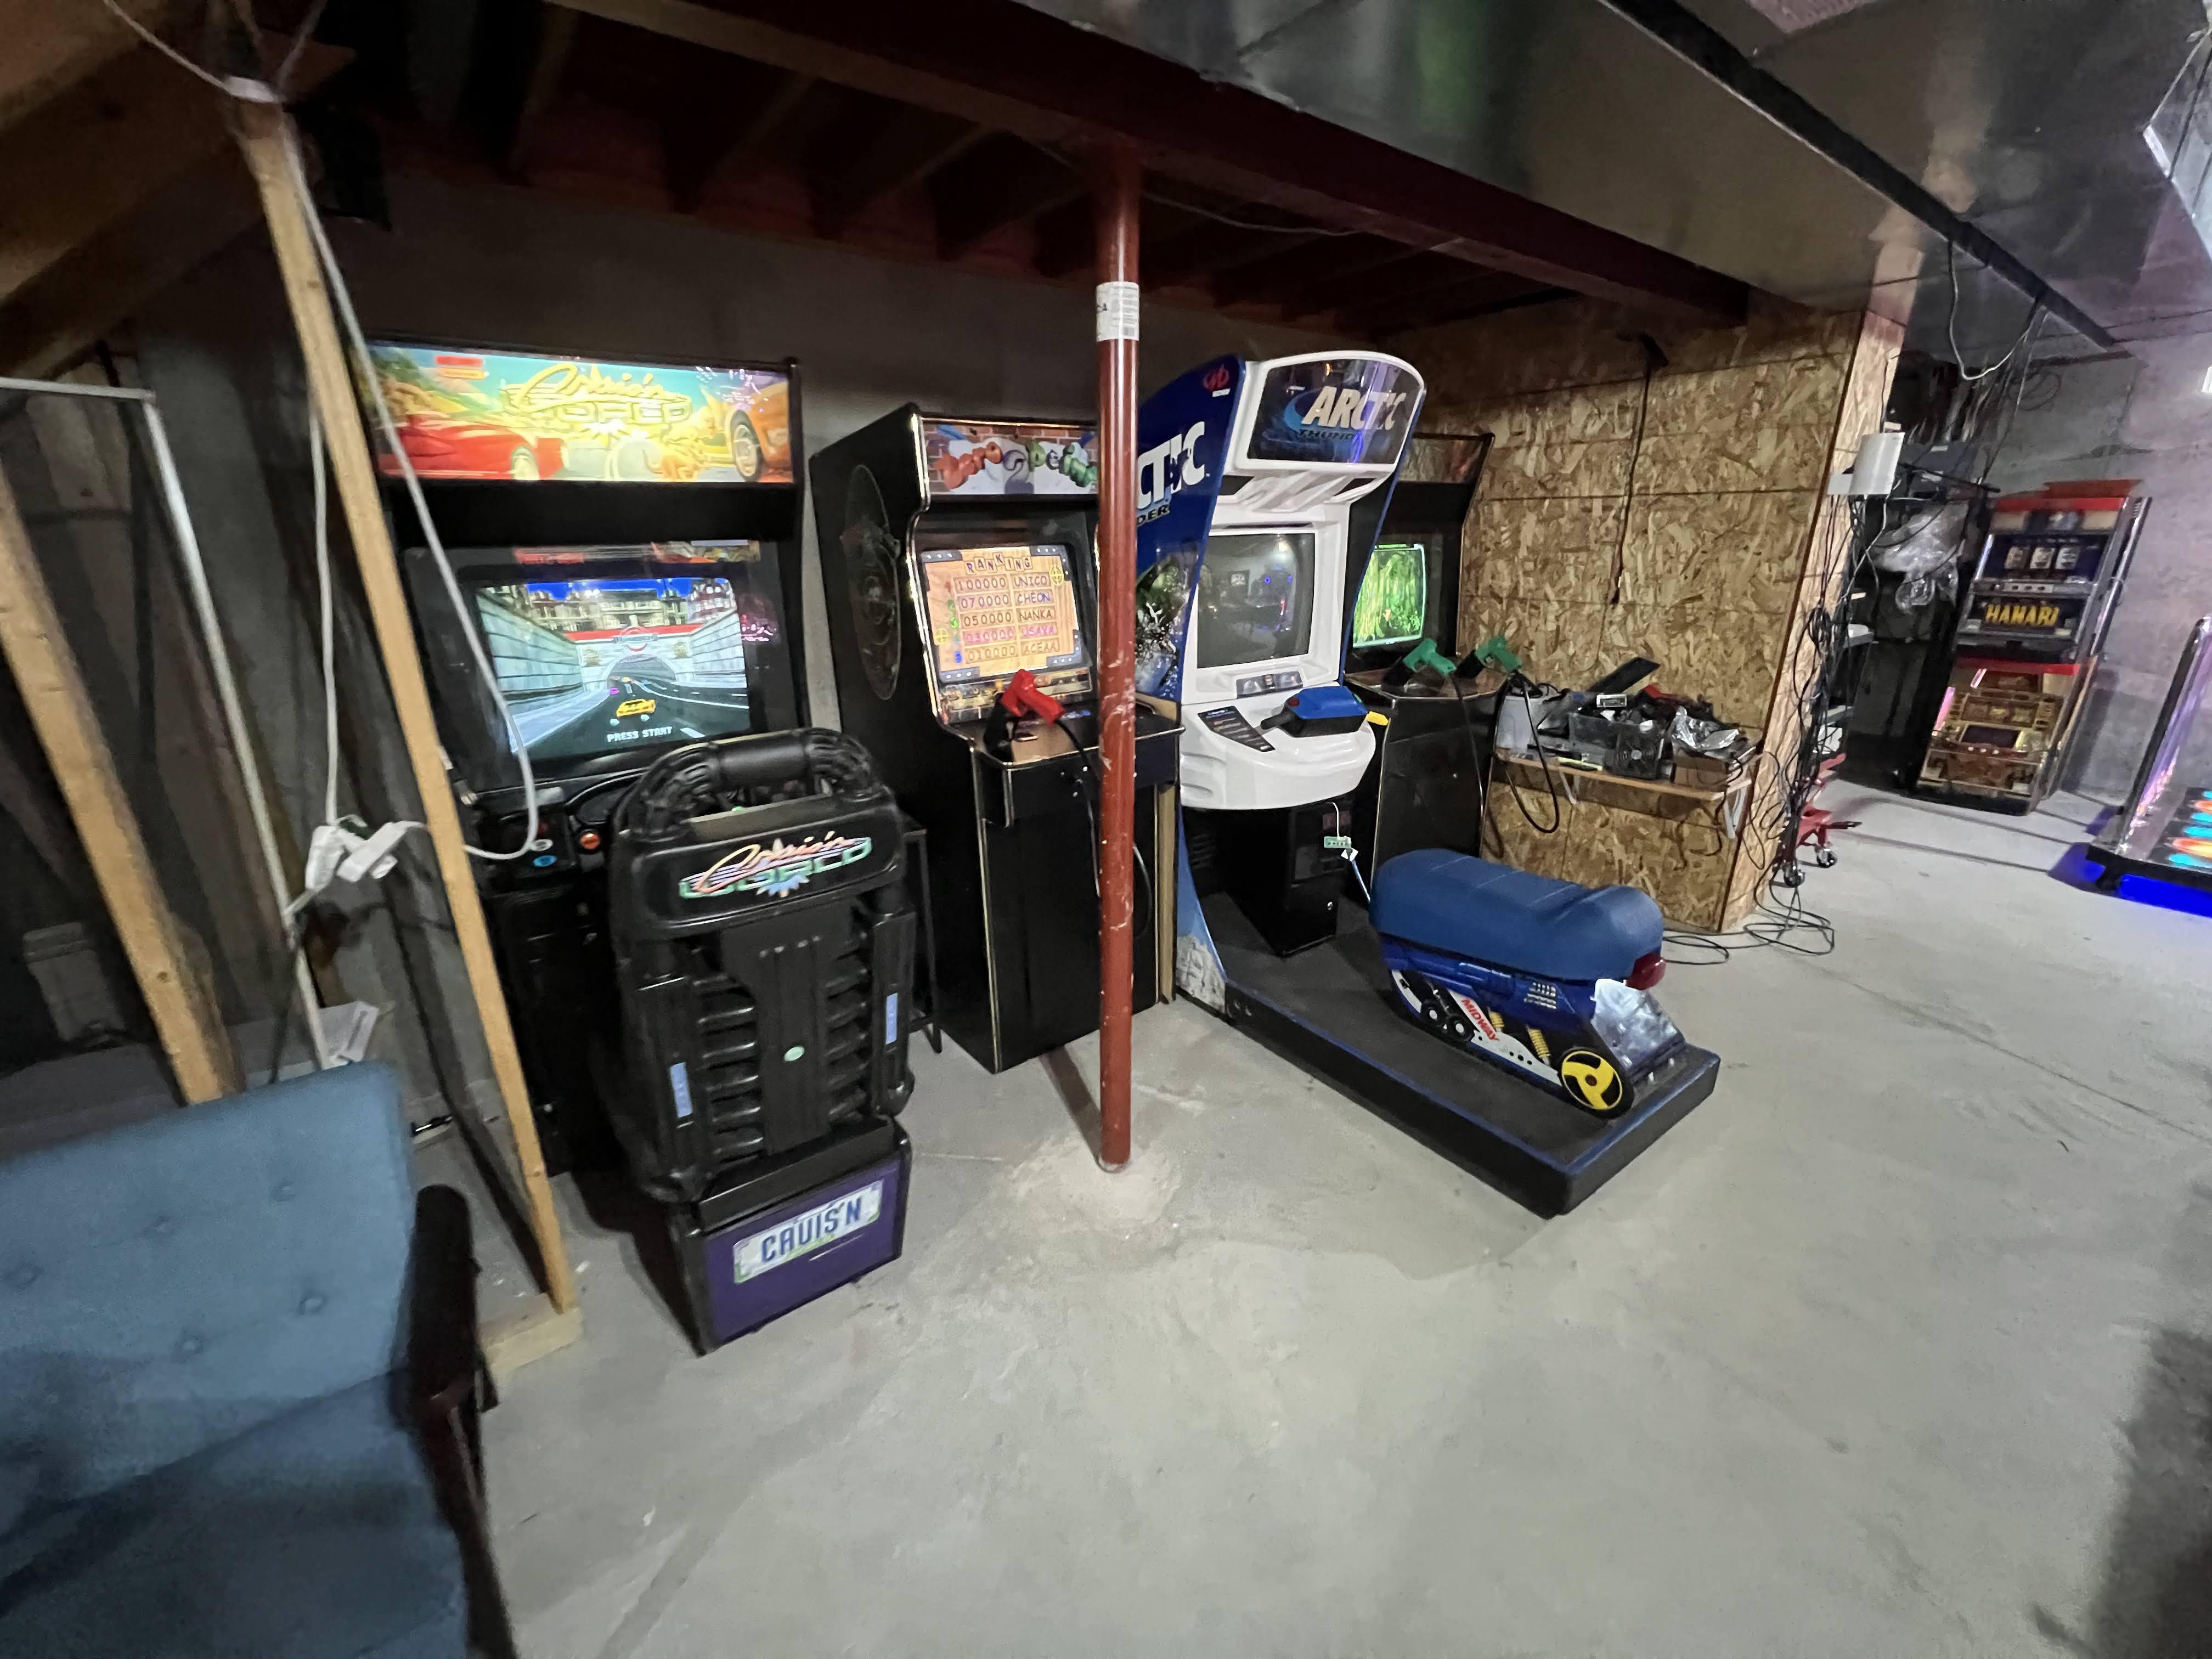 Our arcade games, Cruis'n World, Zero Point 2, Arctic Thunder, and Area 51 Maximum Force